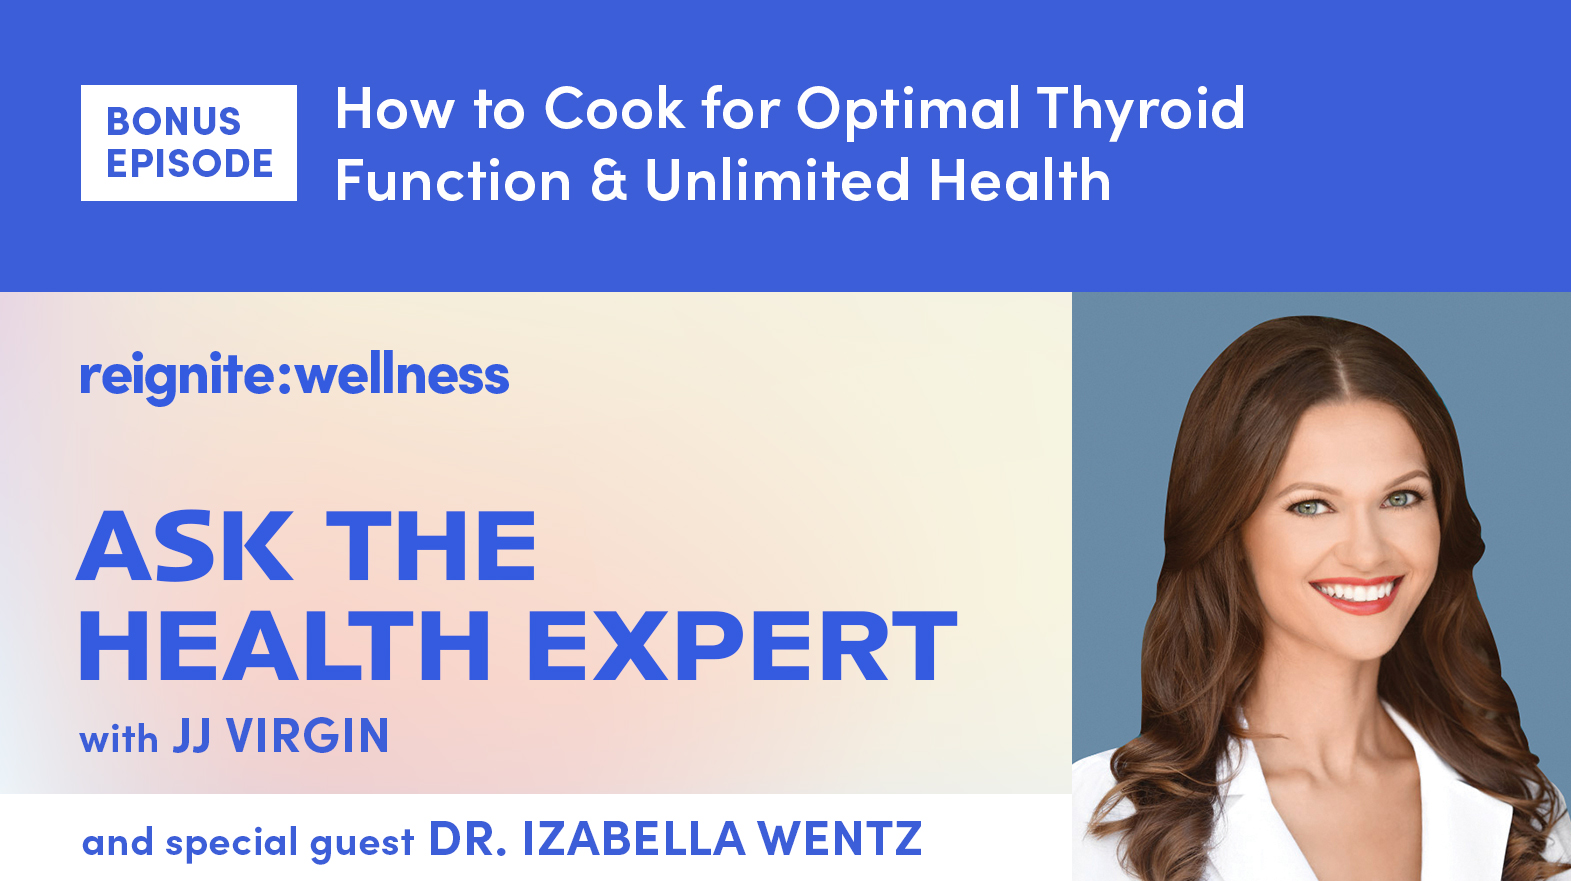 [Bonus Episode] How to Cook for Optimal Thyroid Function & Unlimited Health with Dr. Izabella Wentz | Ep. 274